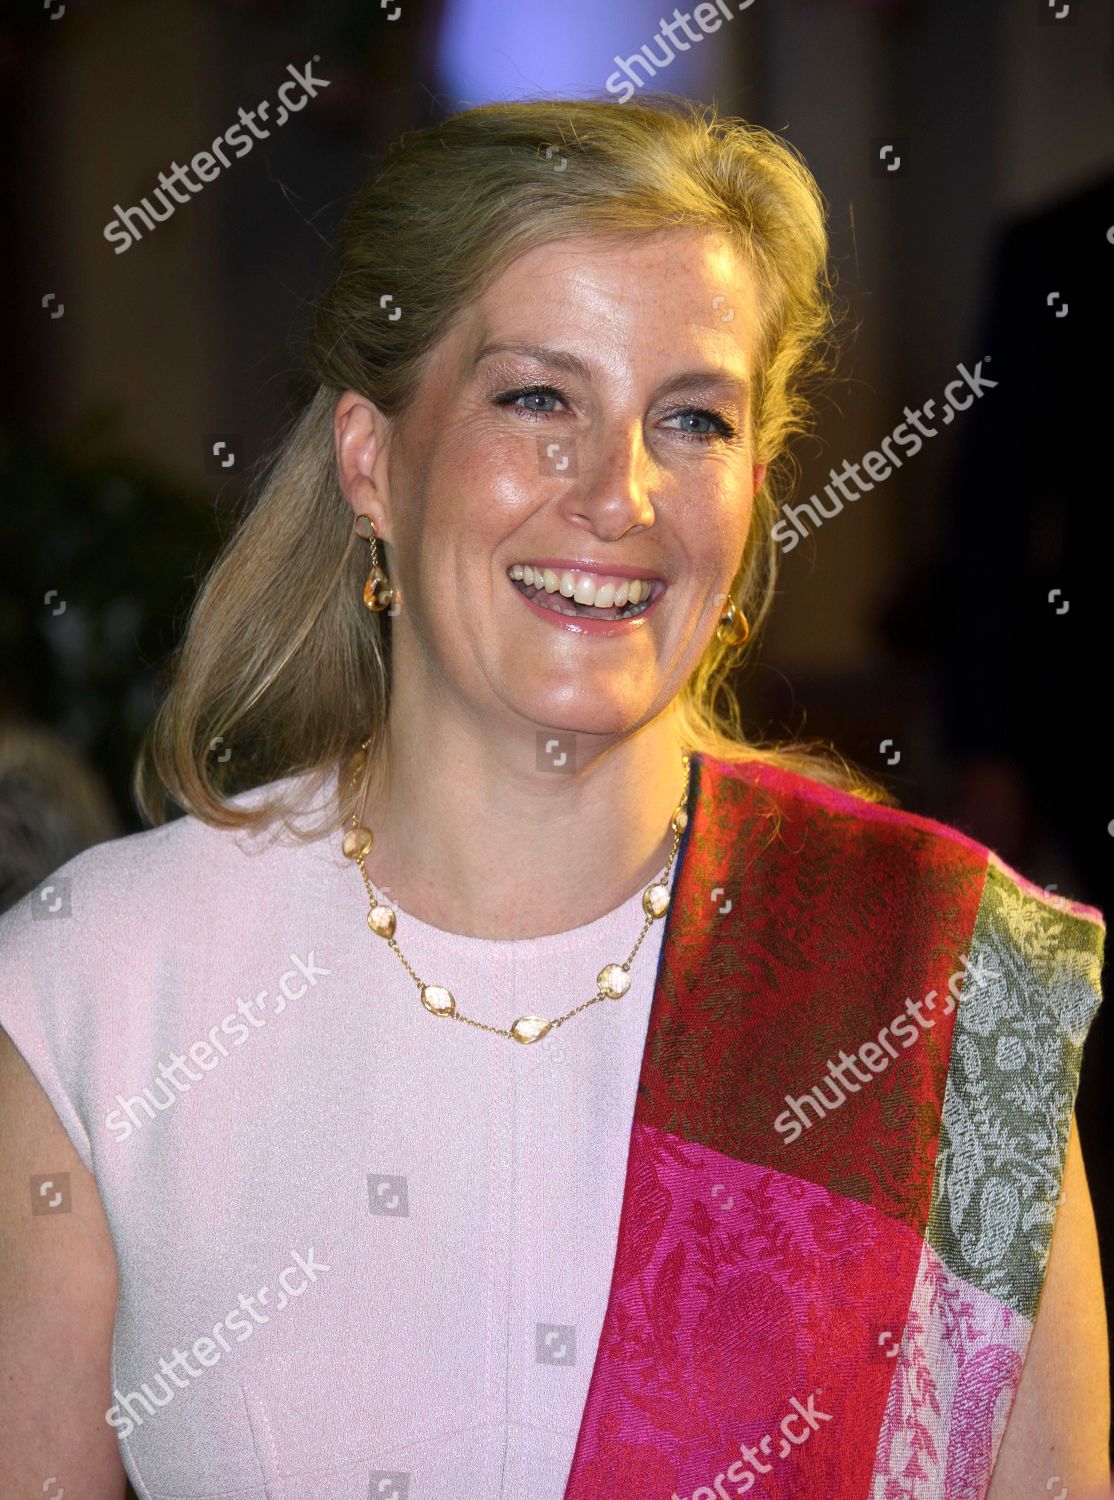 sophie-countess-of-wessex-visit-to-india-shutterstock-editorial-10226793c.jpg